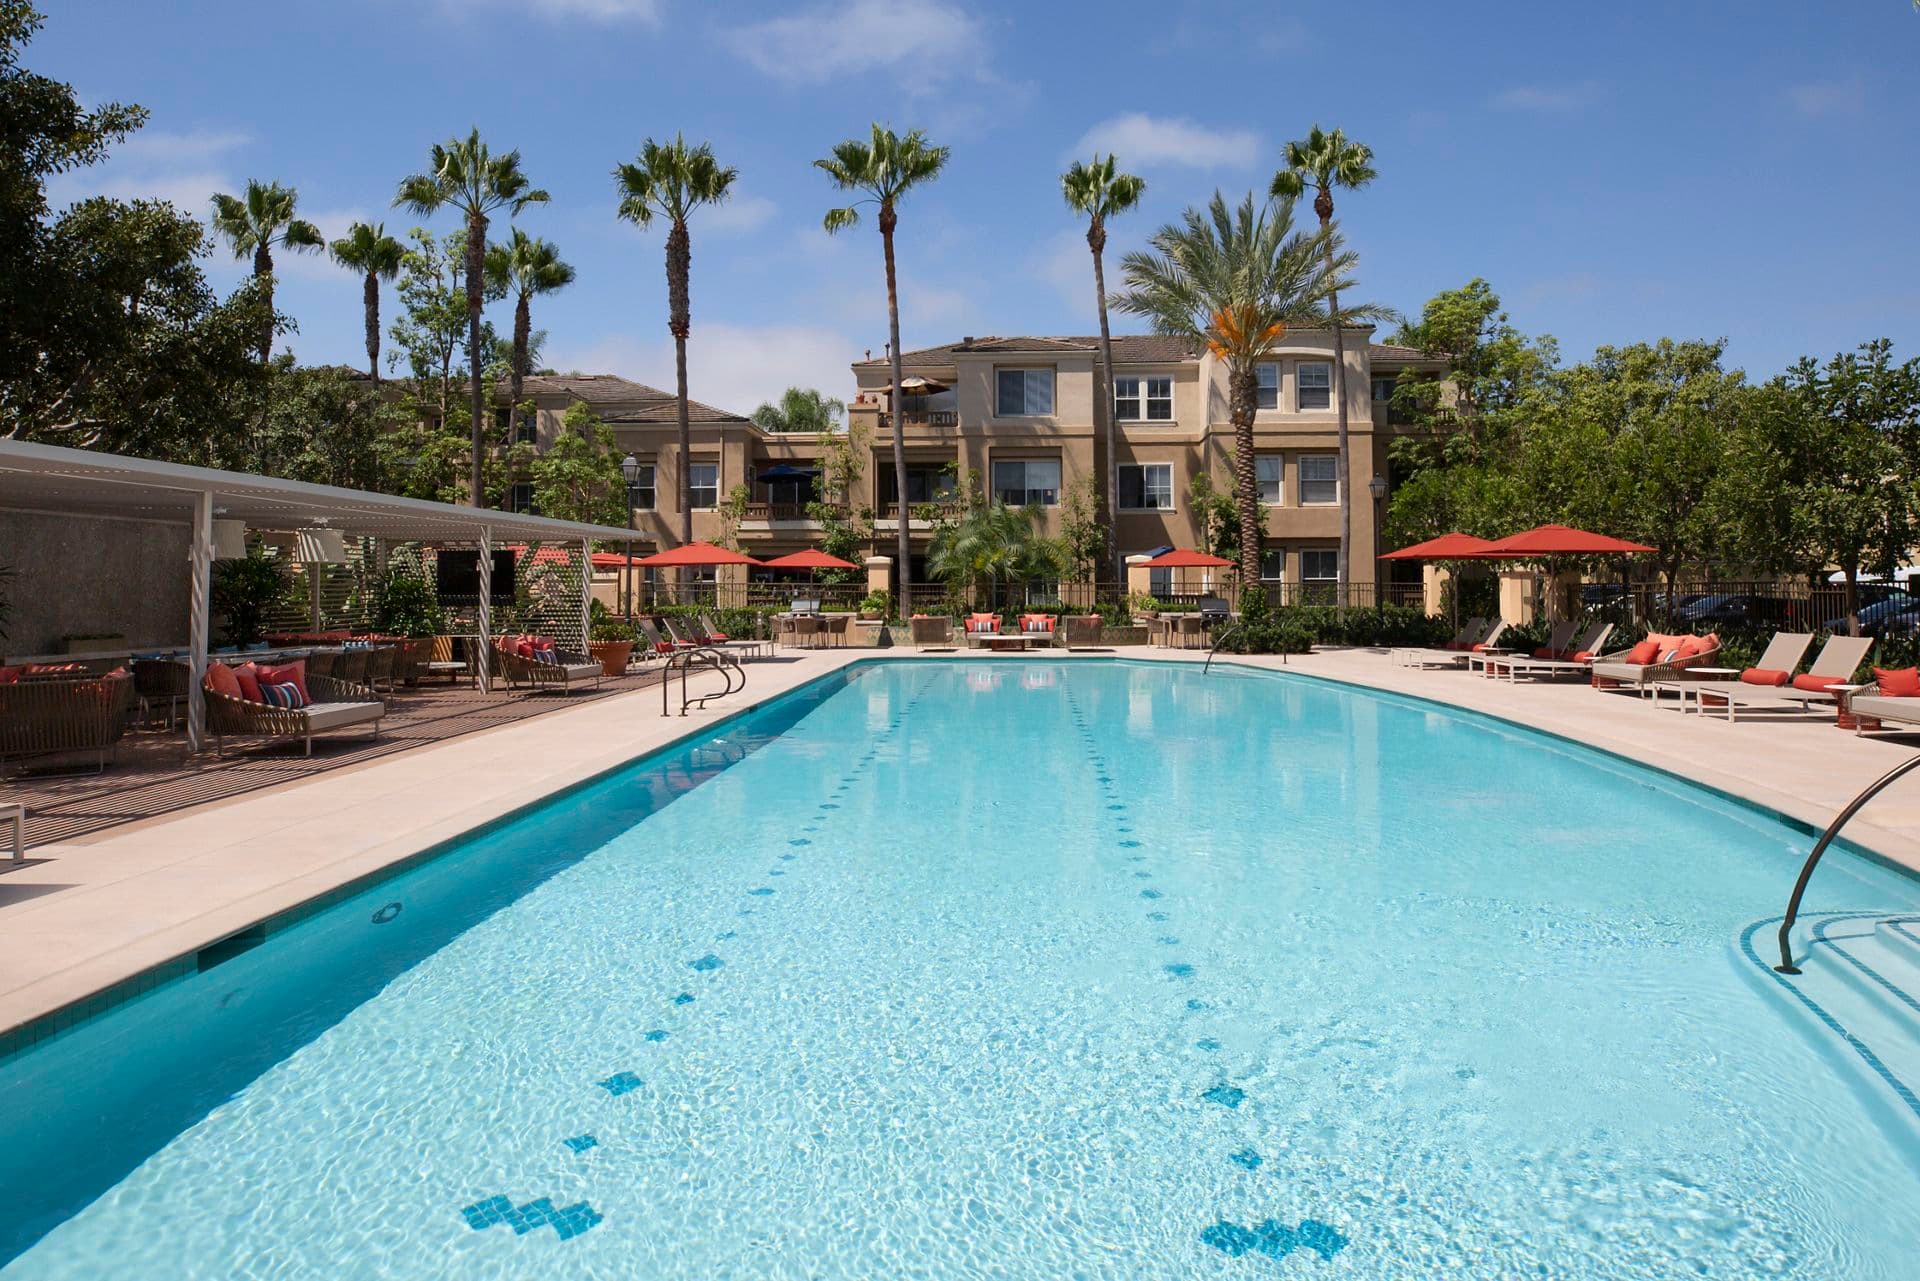 Exterior view of pool at Baypointe Apartment Homes in Newport Beach, CA.